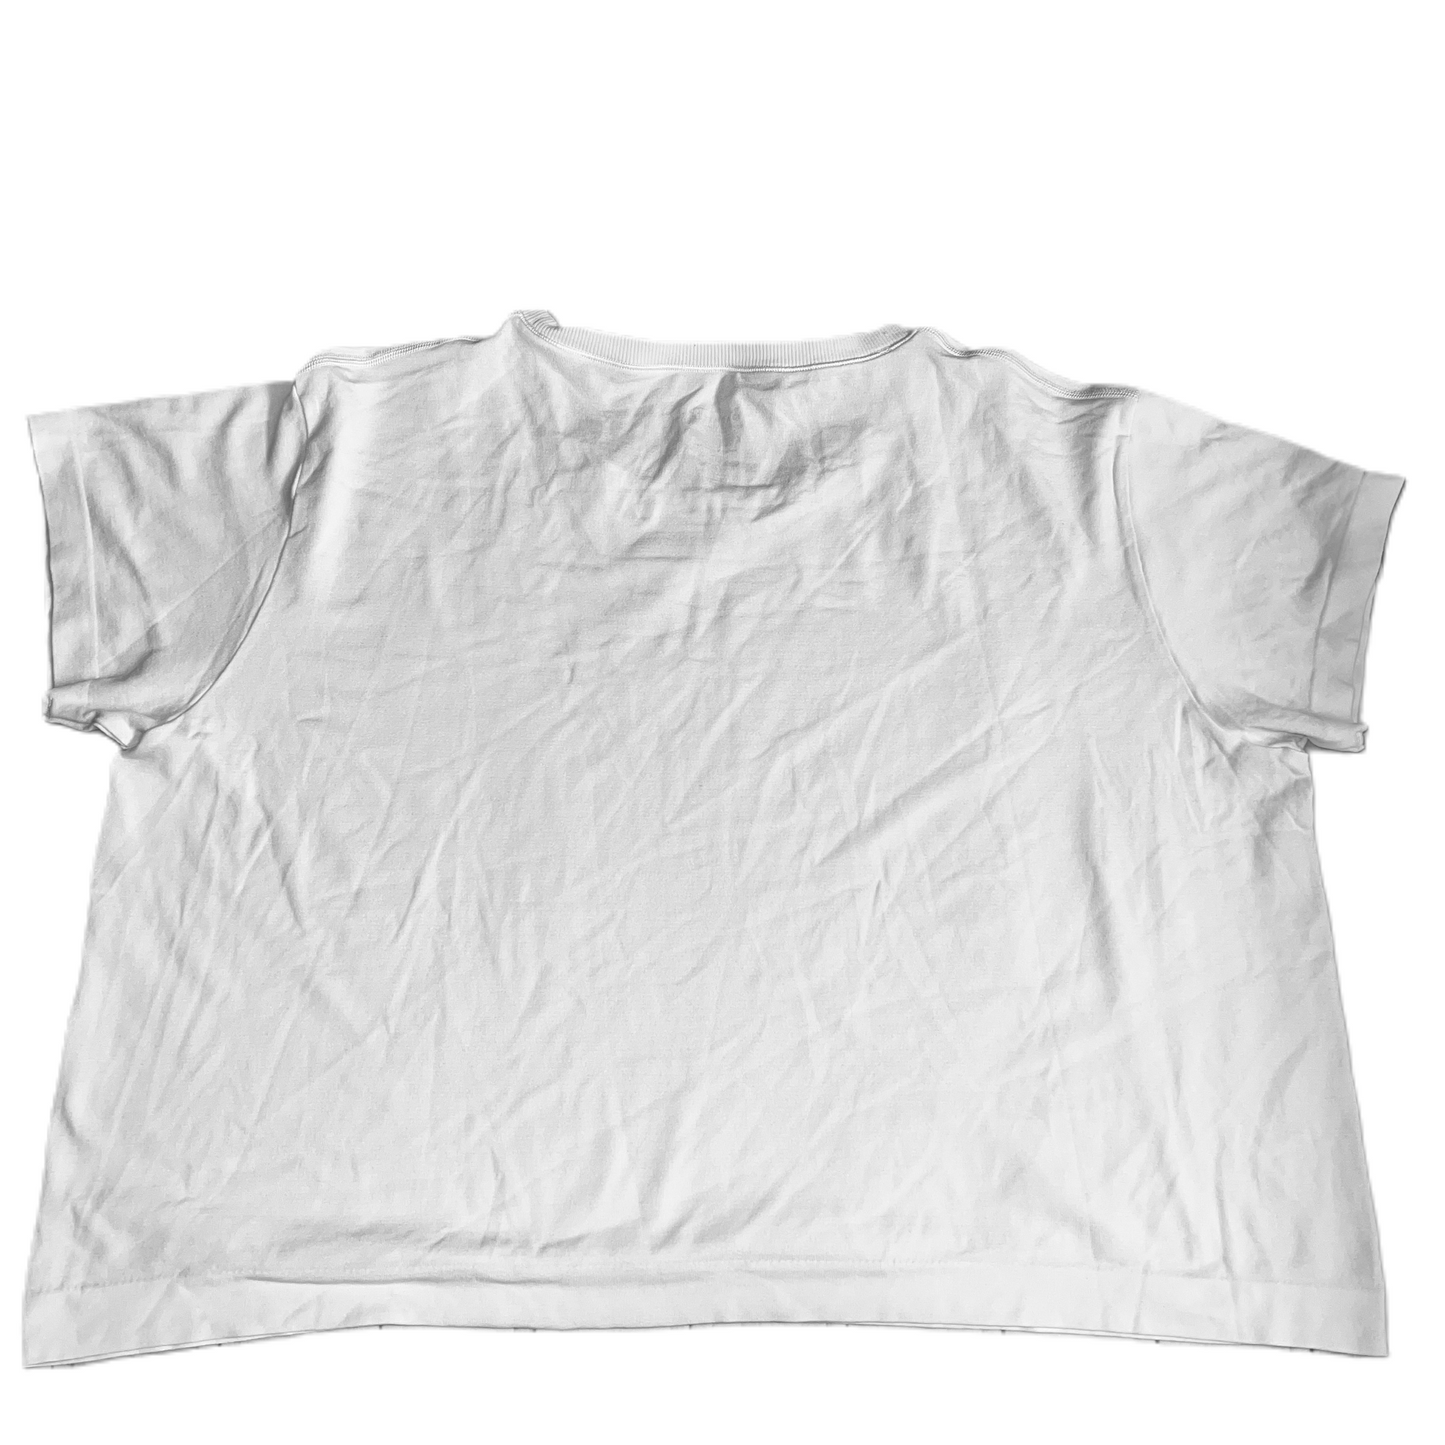 White Athletic Top Short Sleeve By Athleta, Size: L